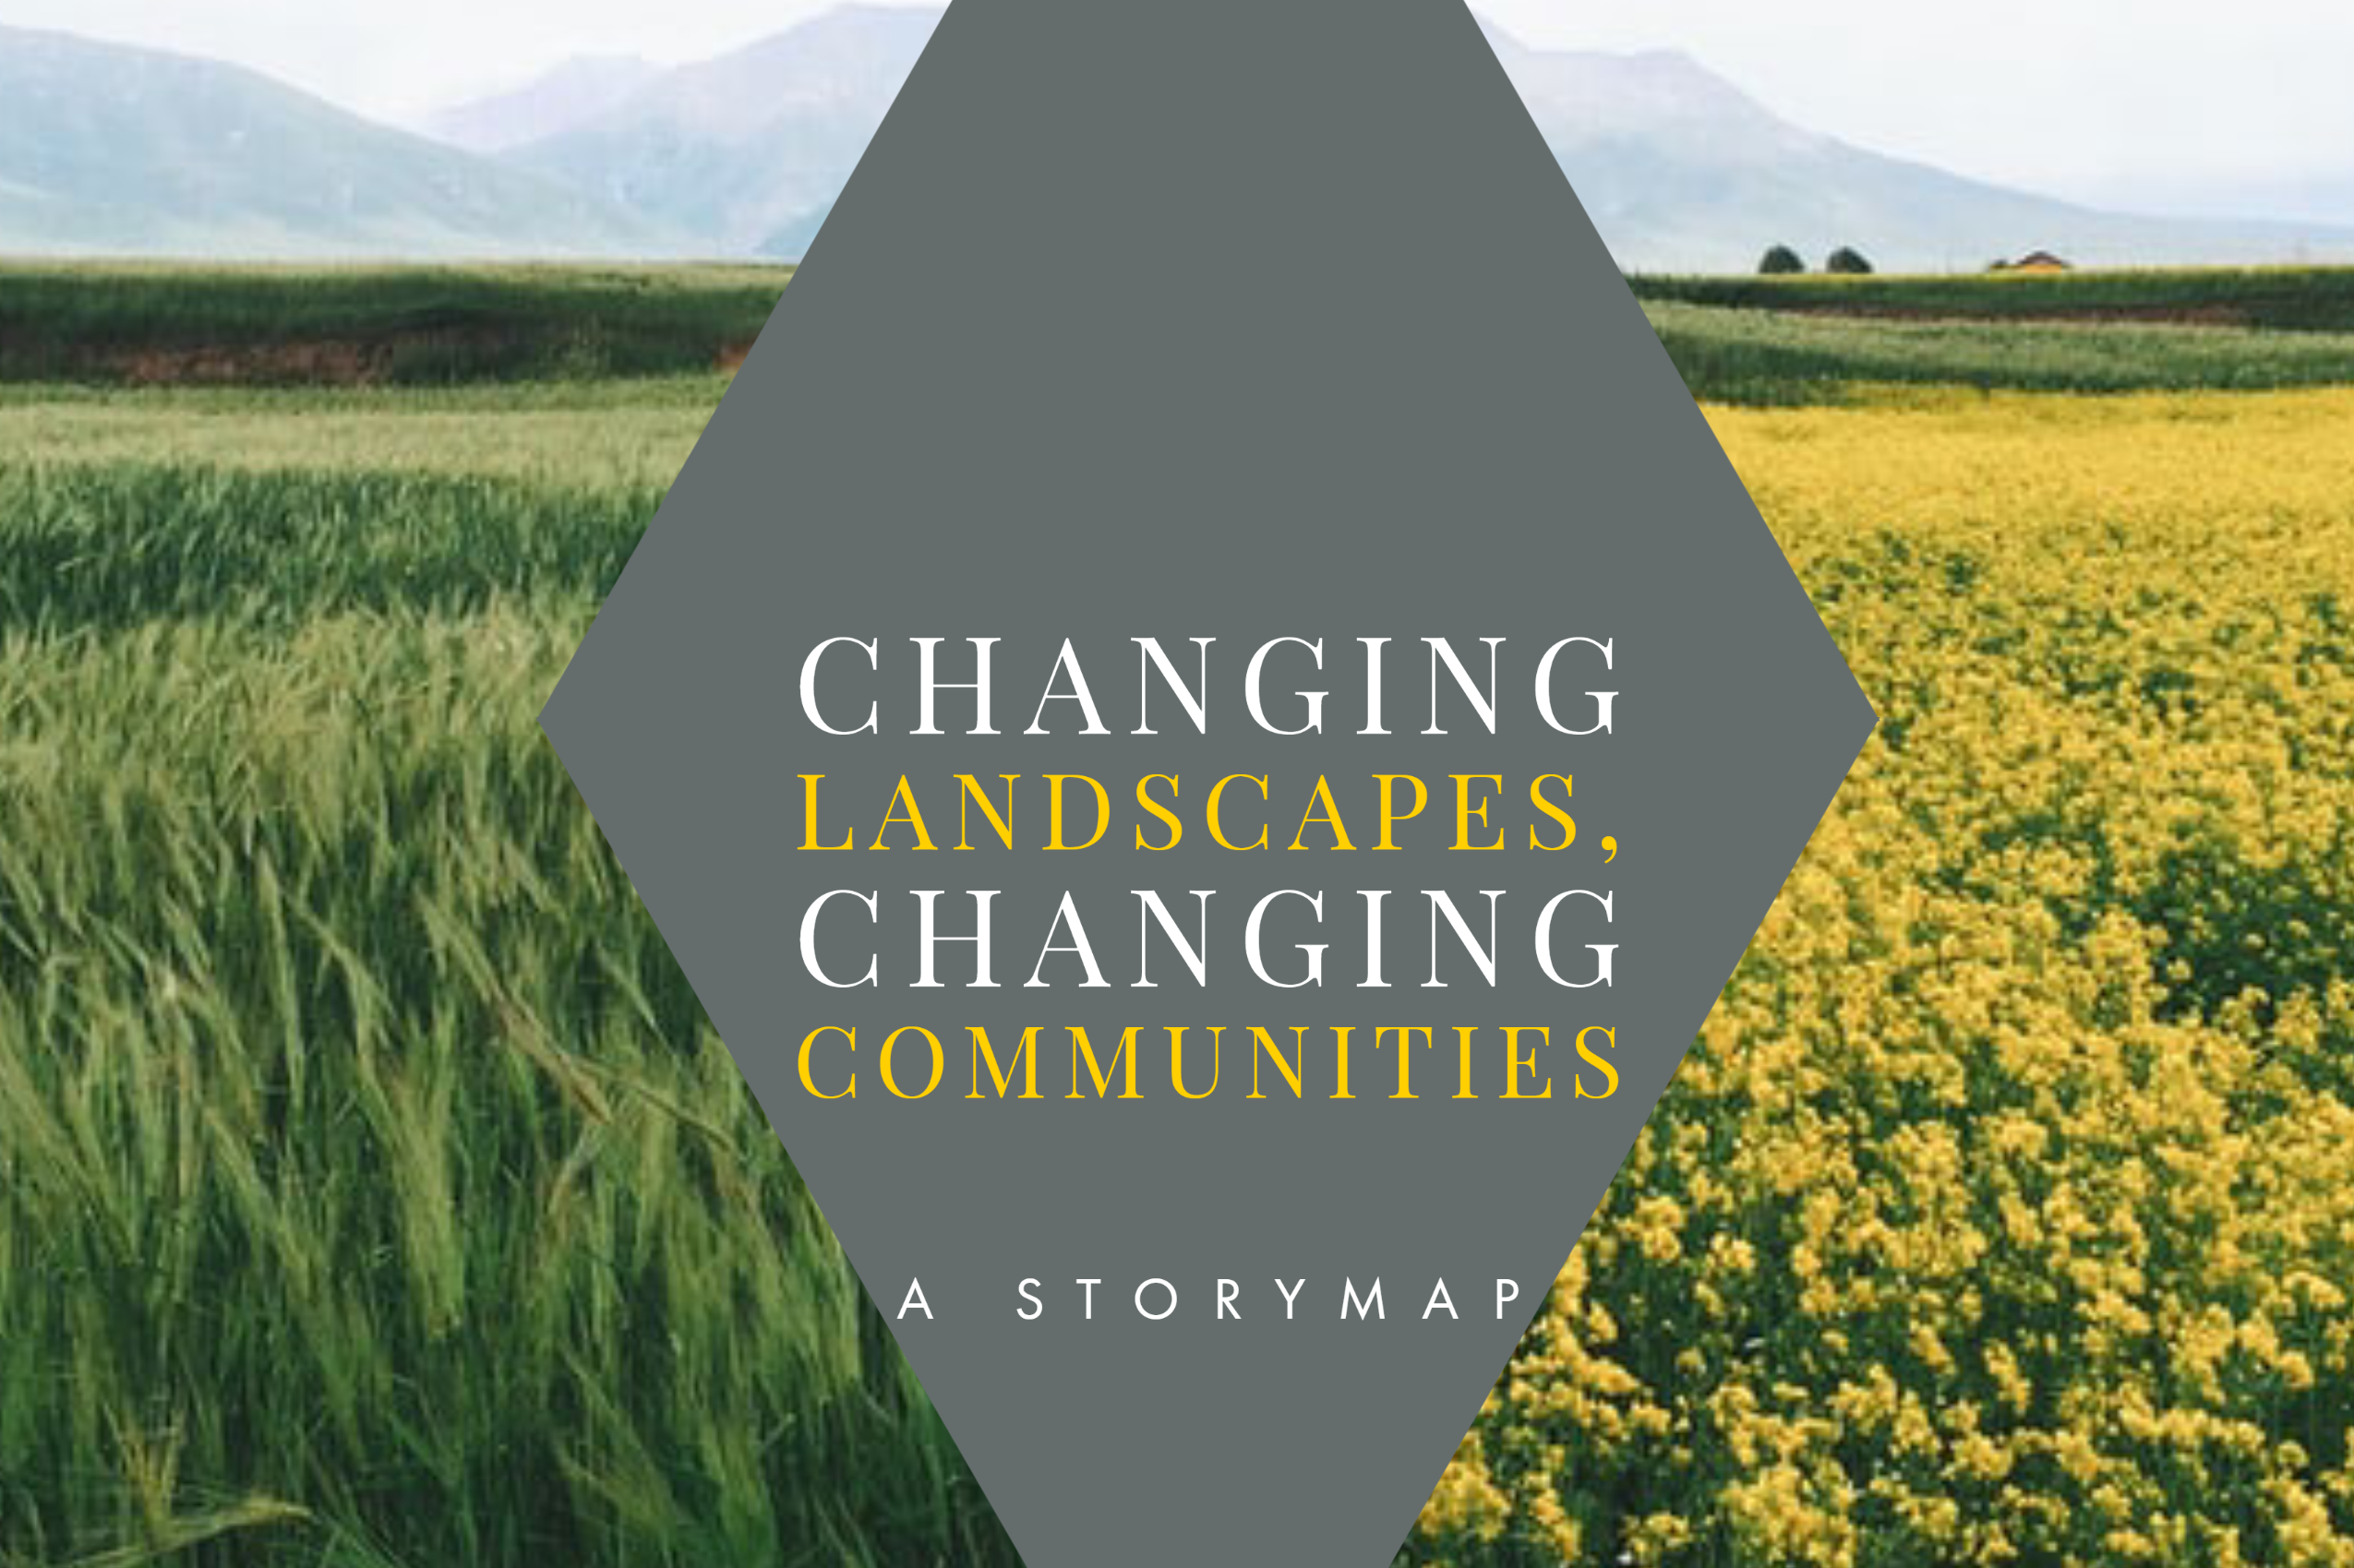 Changing Landscapes, Changing Communities. A Storymap